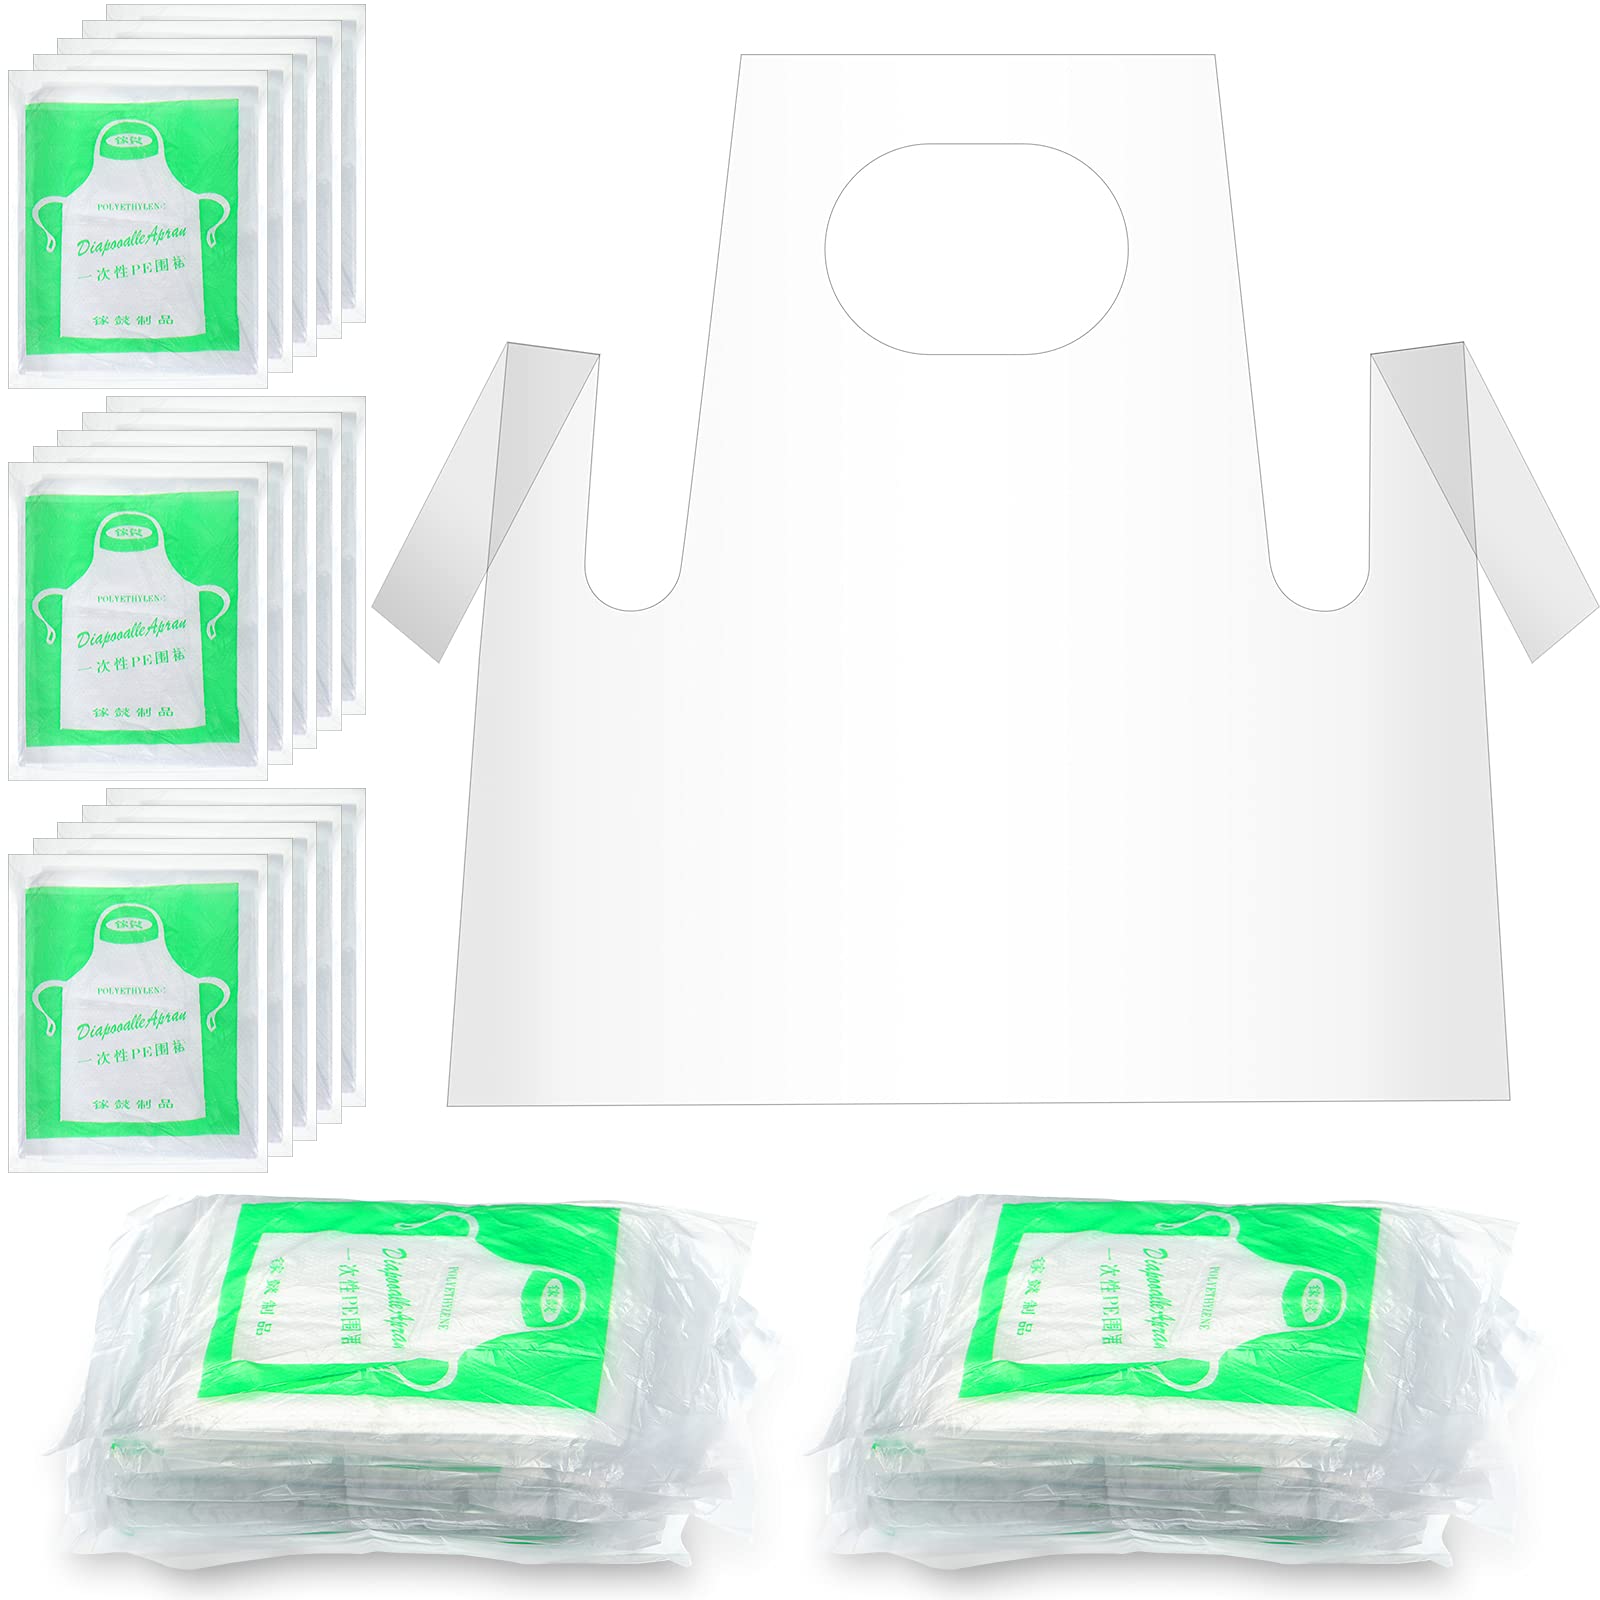 SATINIOR 50 Pieces Disposable Aprons Plastic Aprons for Kids Waterproof Oil Proof Small Clear Polythene Children Cooking Apron for Painting Cooking Eating Teaching DIY Craft Picnic